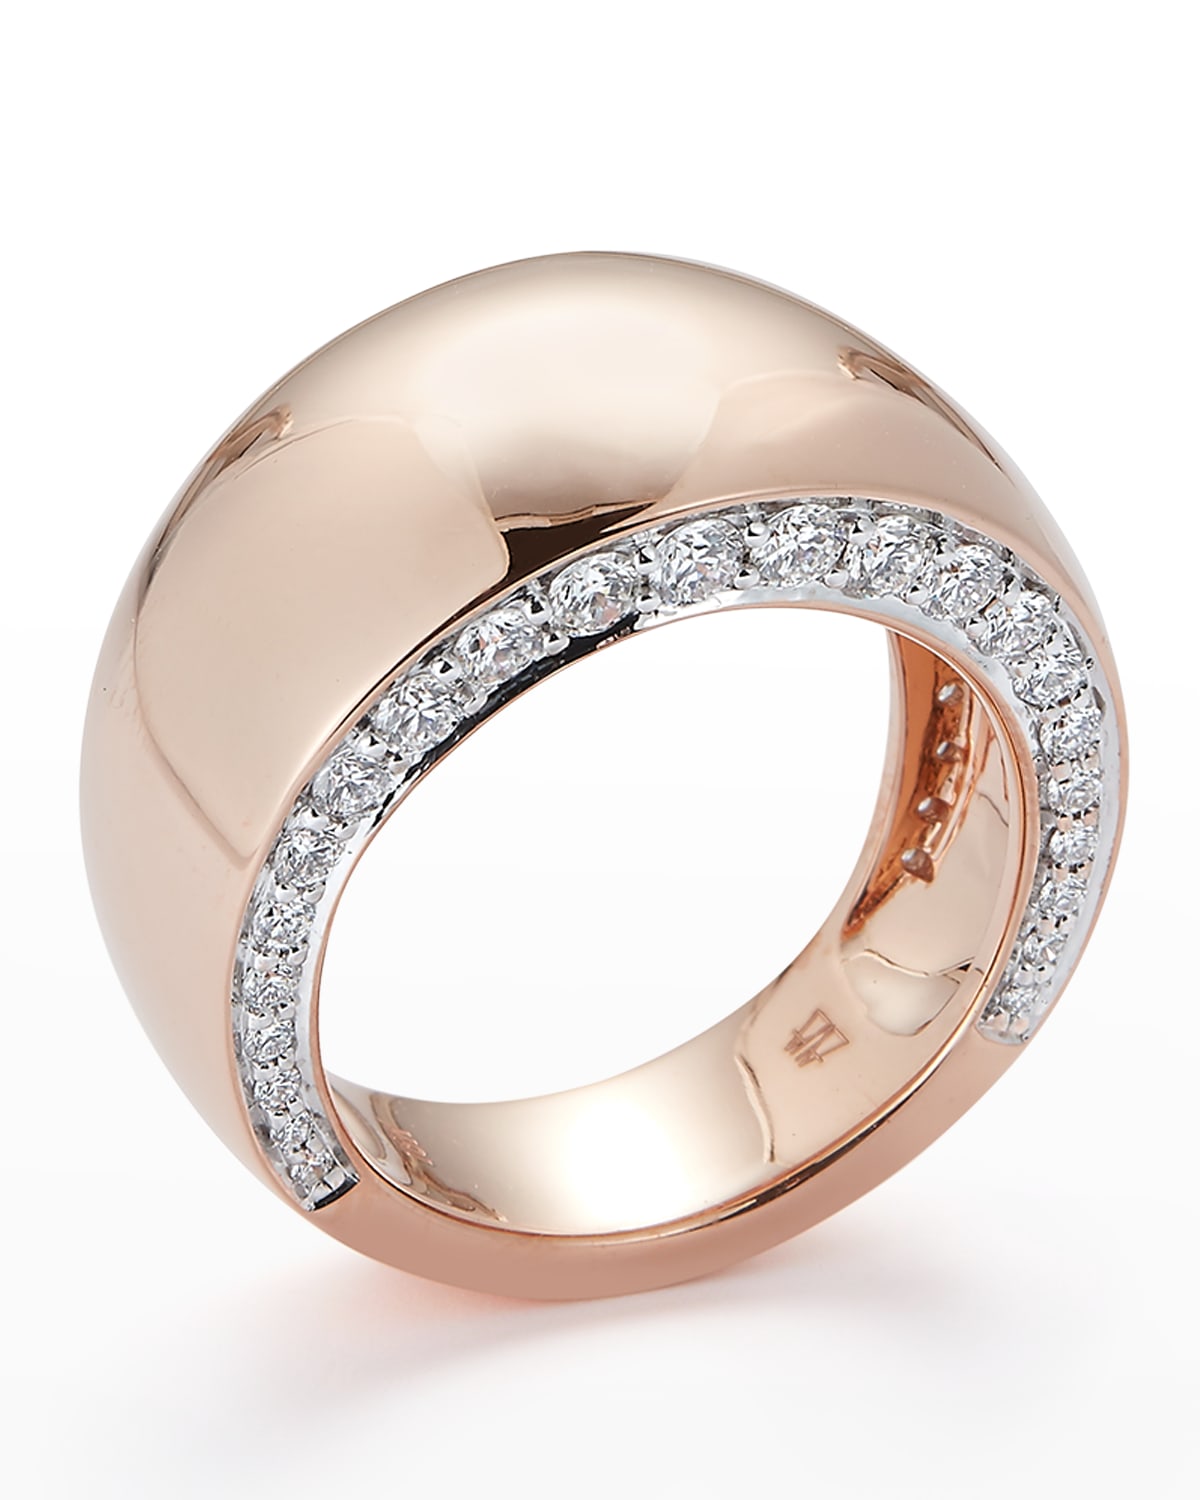 WALTERS FAITH LYTTON ROSE GOLD WIDE HIGH POLISH BAND WITH WHITE RHODIUM AND DIAMONDS SIZE 8